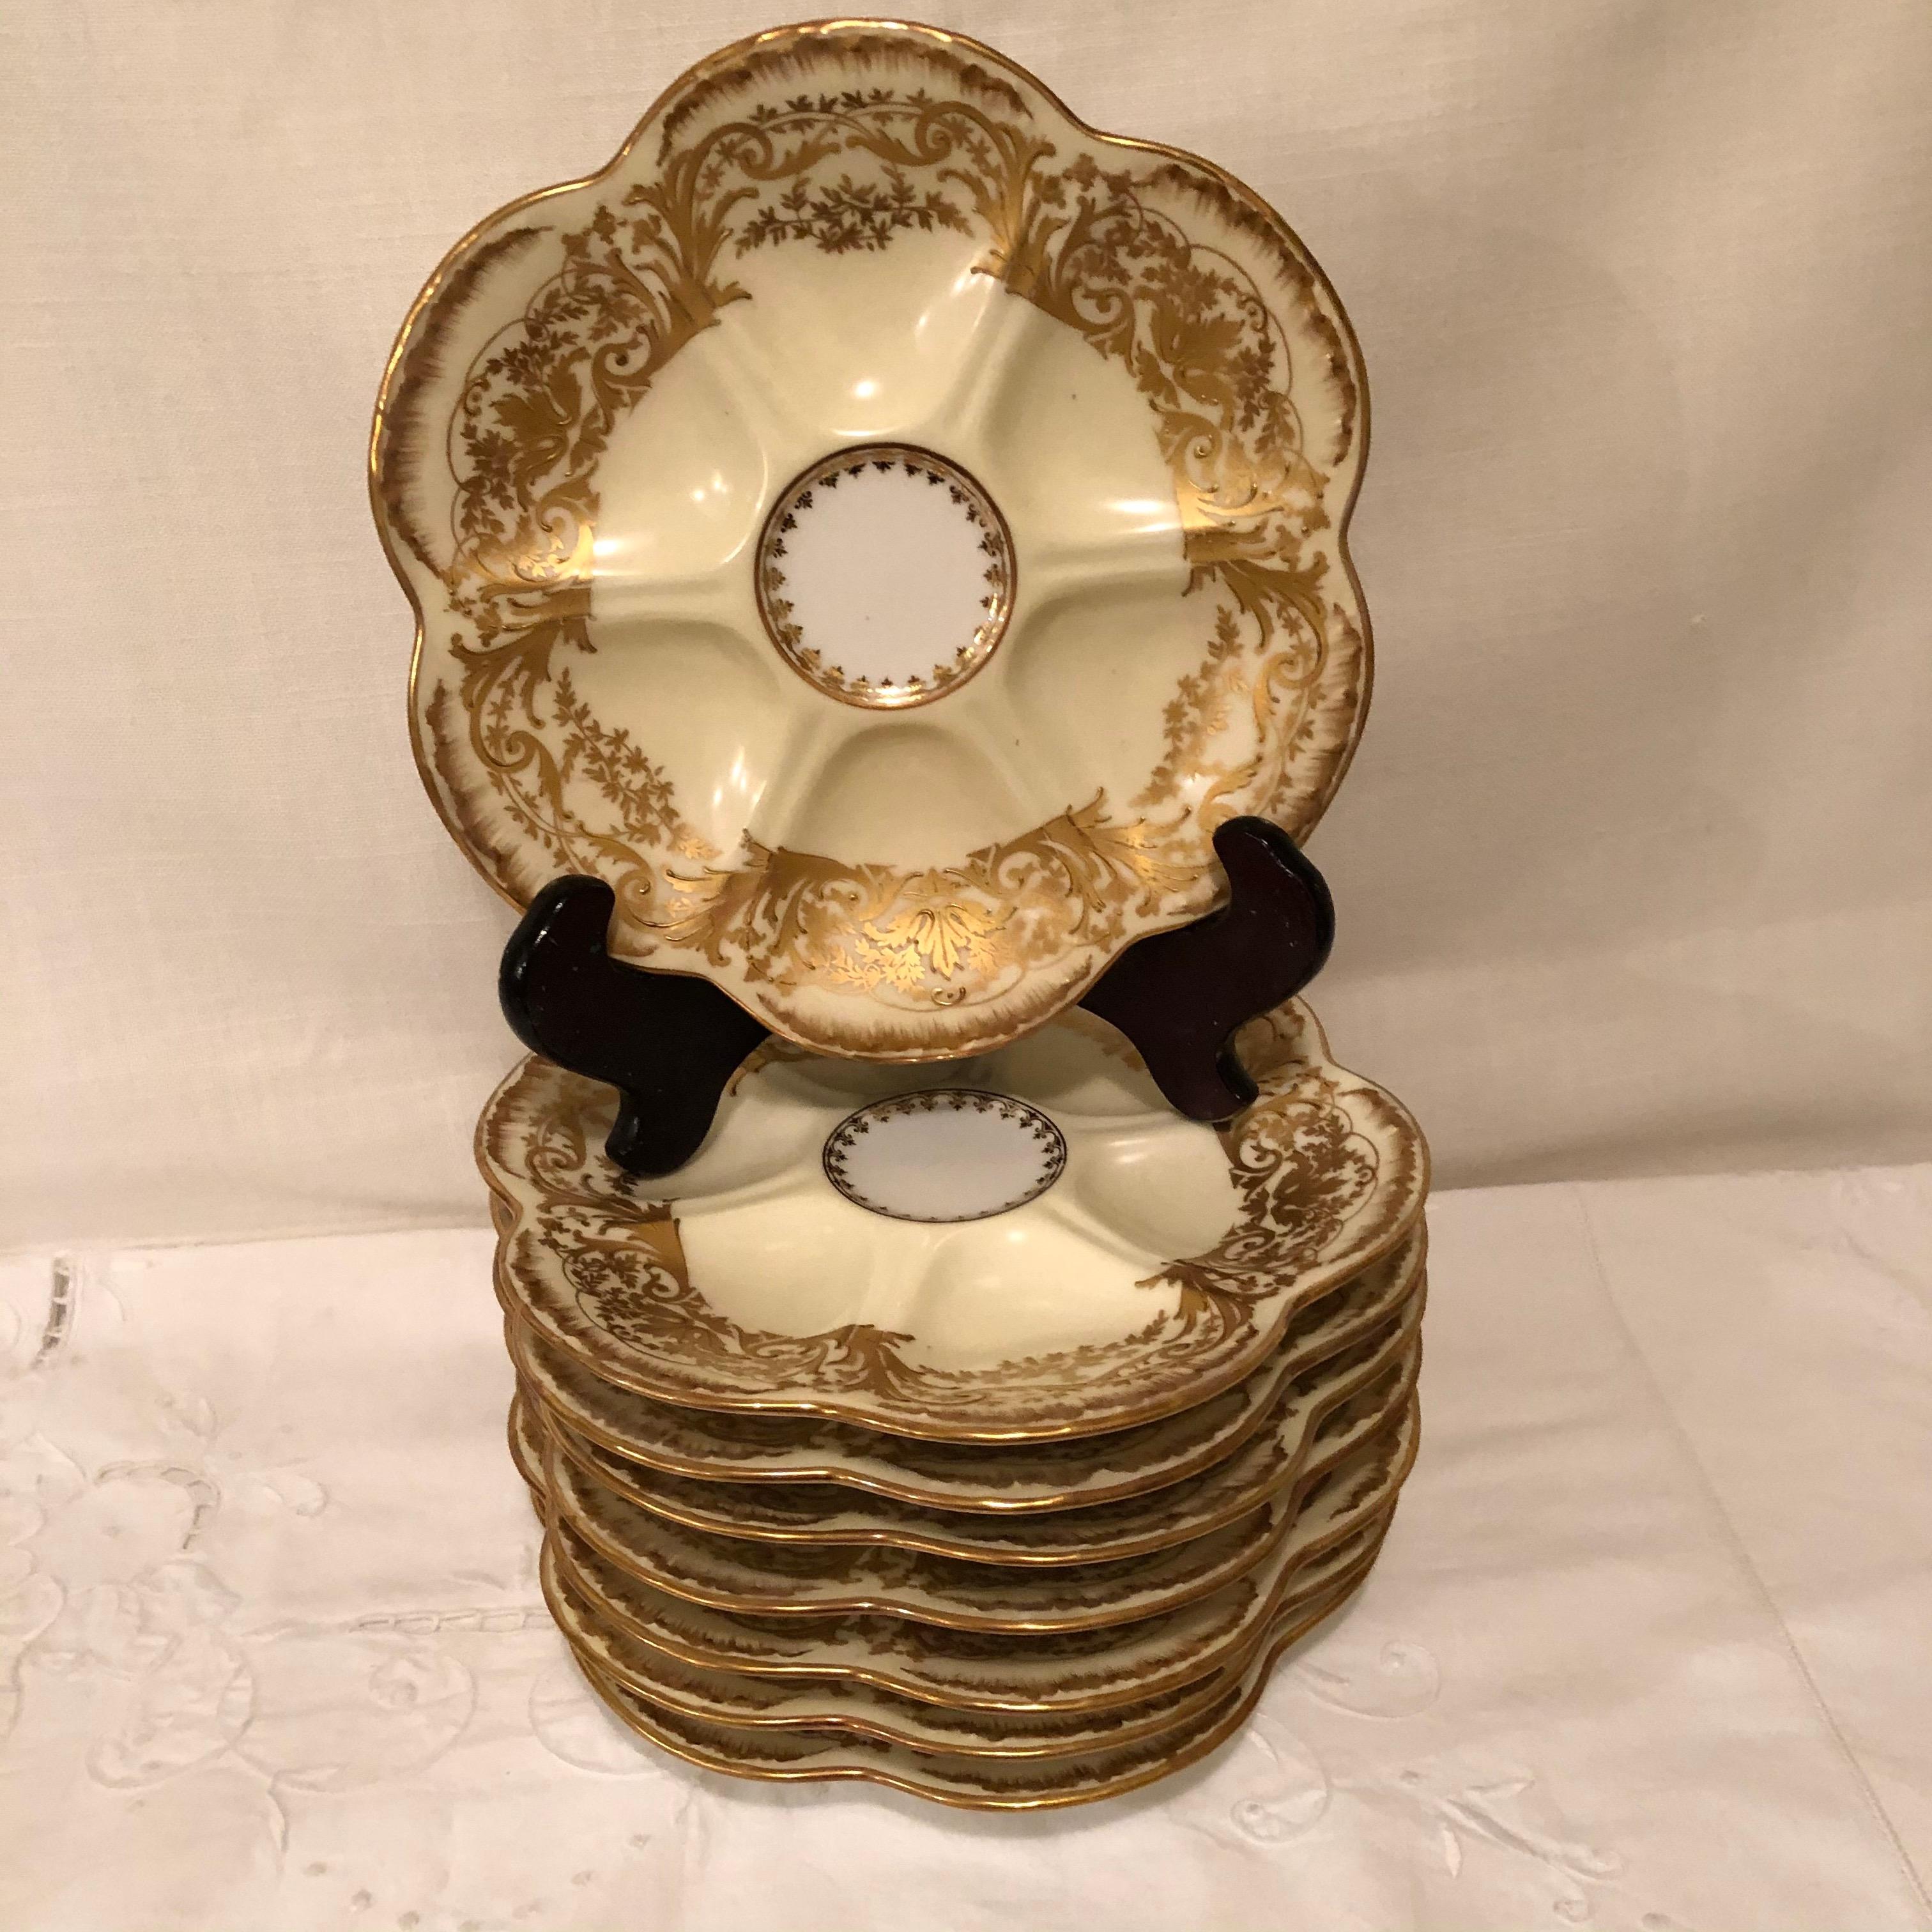 Gilt Set of Eight Limoges Oyster Plates with Profuse Raised Gold Decoration